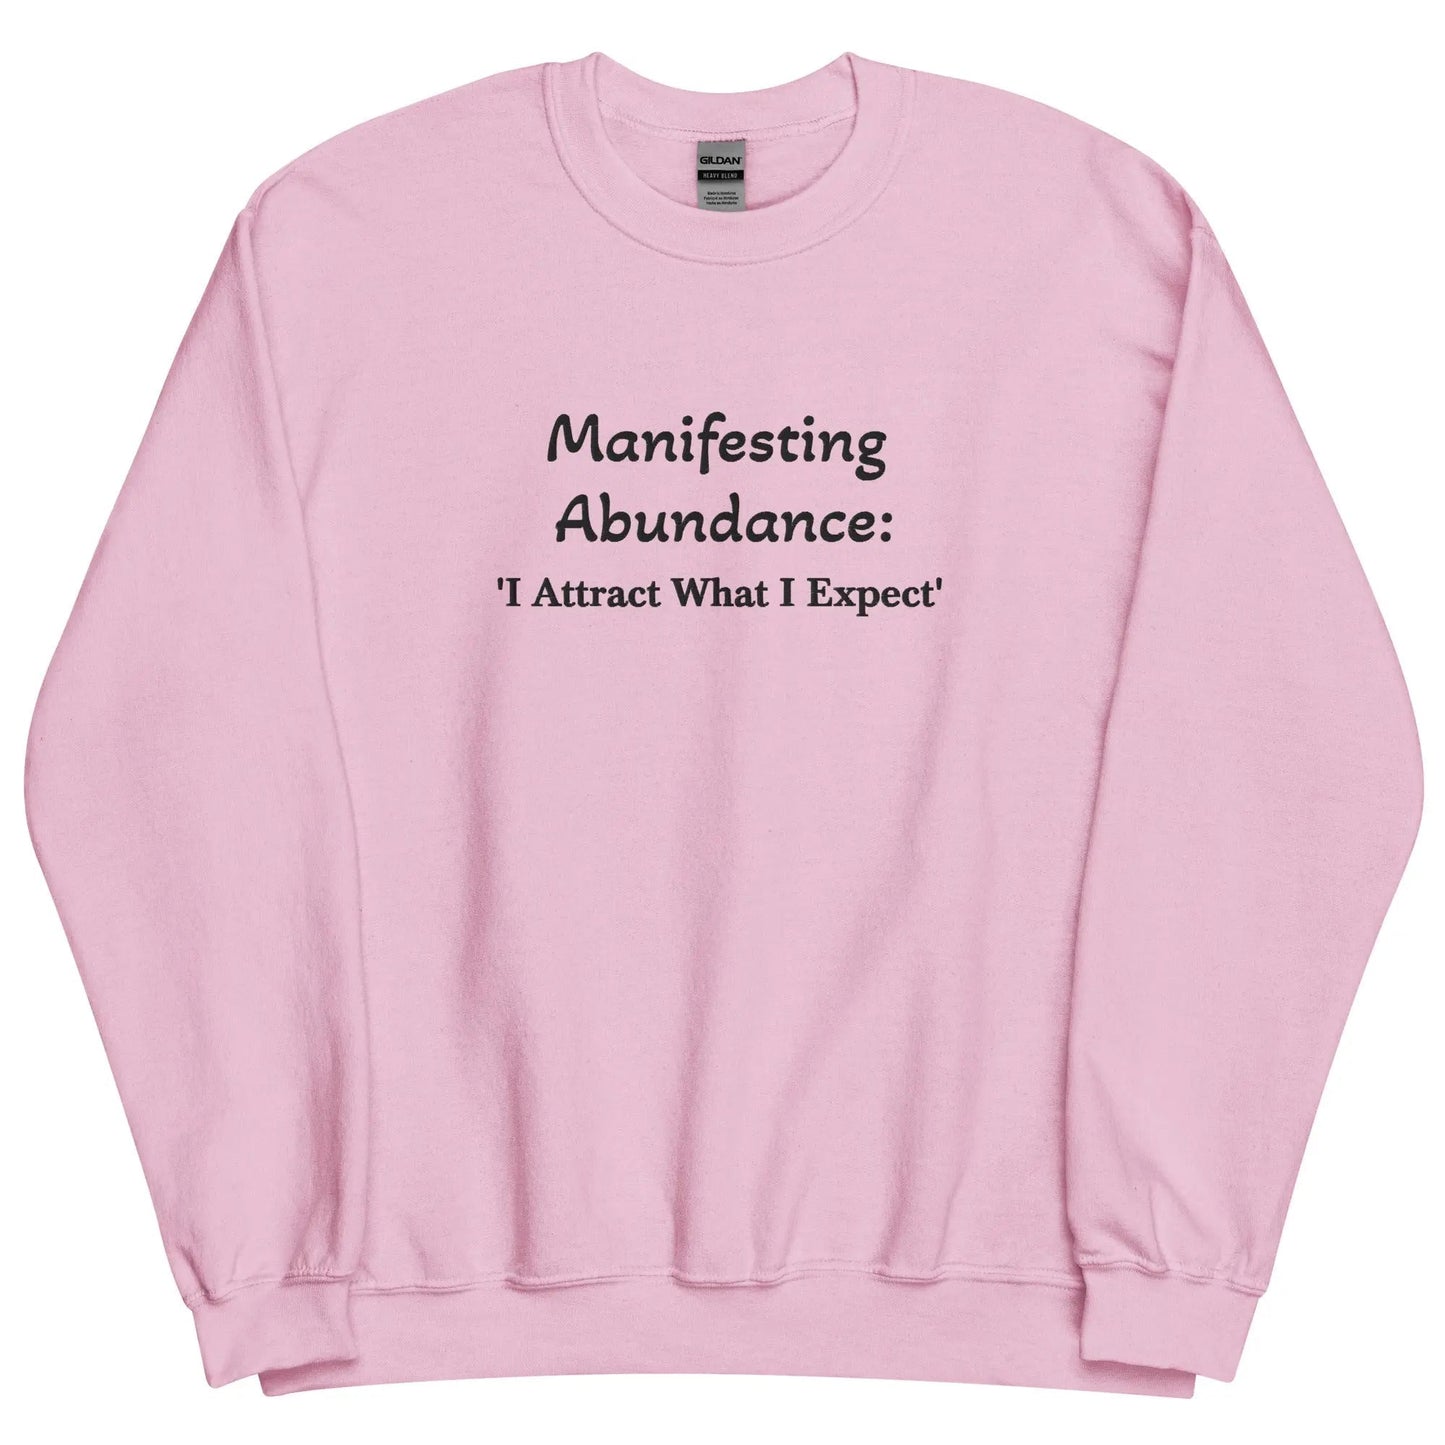 Embroidered Manifesting Abundance: 'I Attract What I Expect' Crewneck Sweatshirt-clothes- sweater-Light Pink-S-mysticalcherry